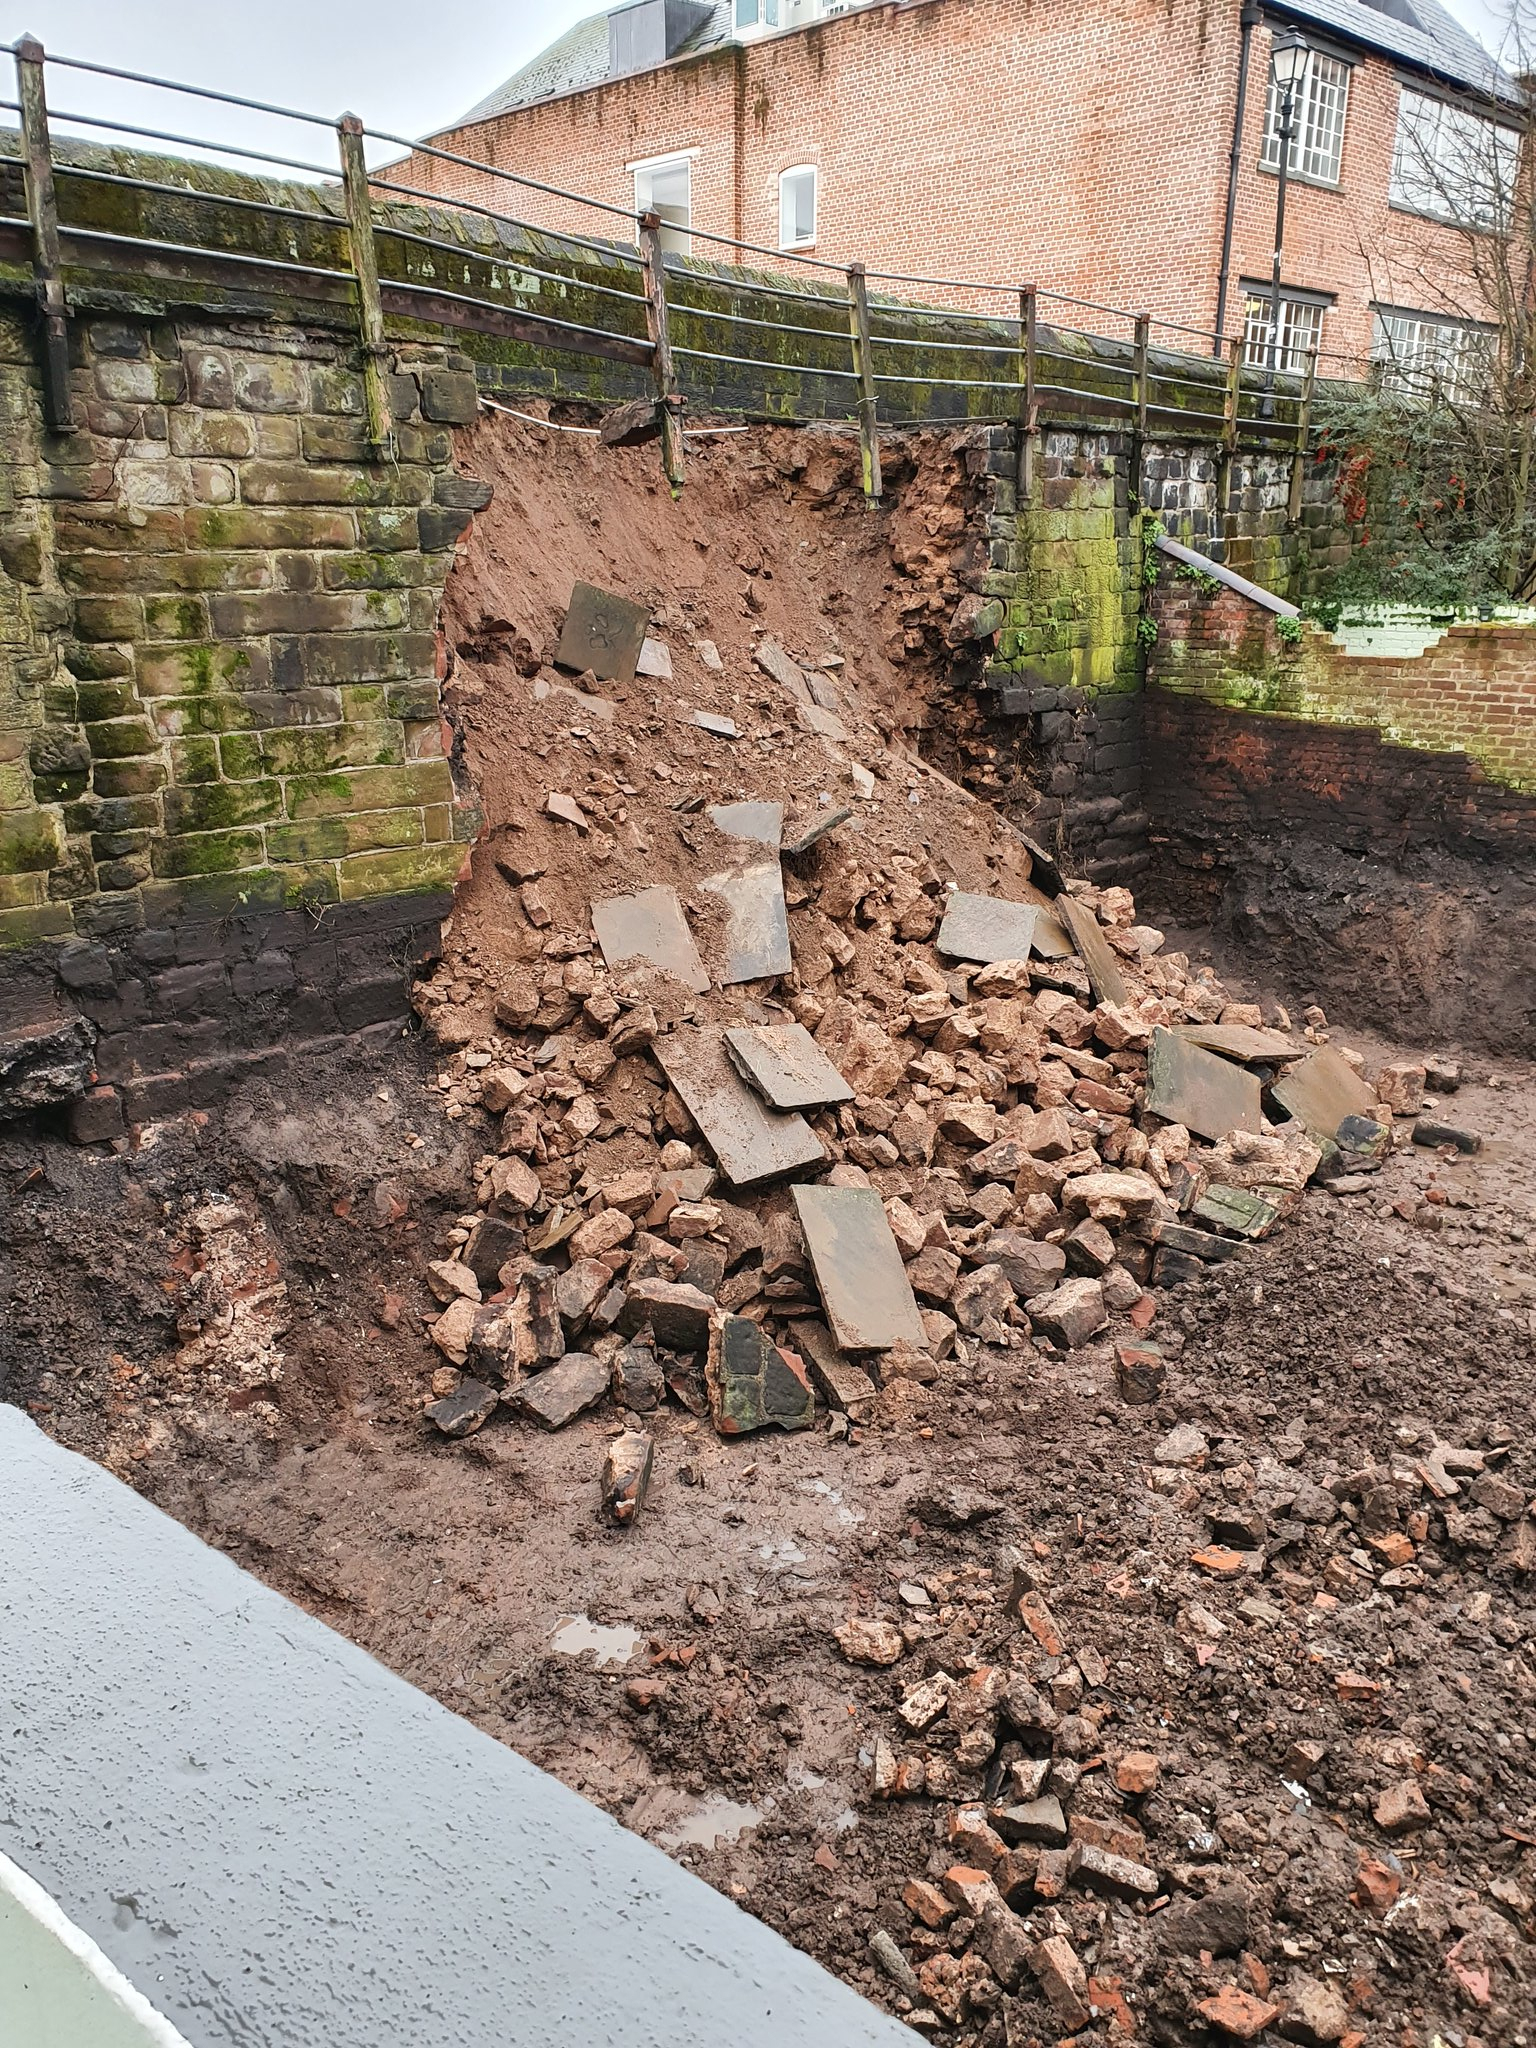 The collapsed section of Chester City Walls. Picture: @LoveLifeLossTom/PA.